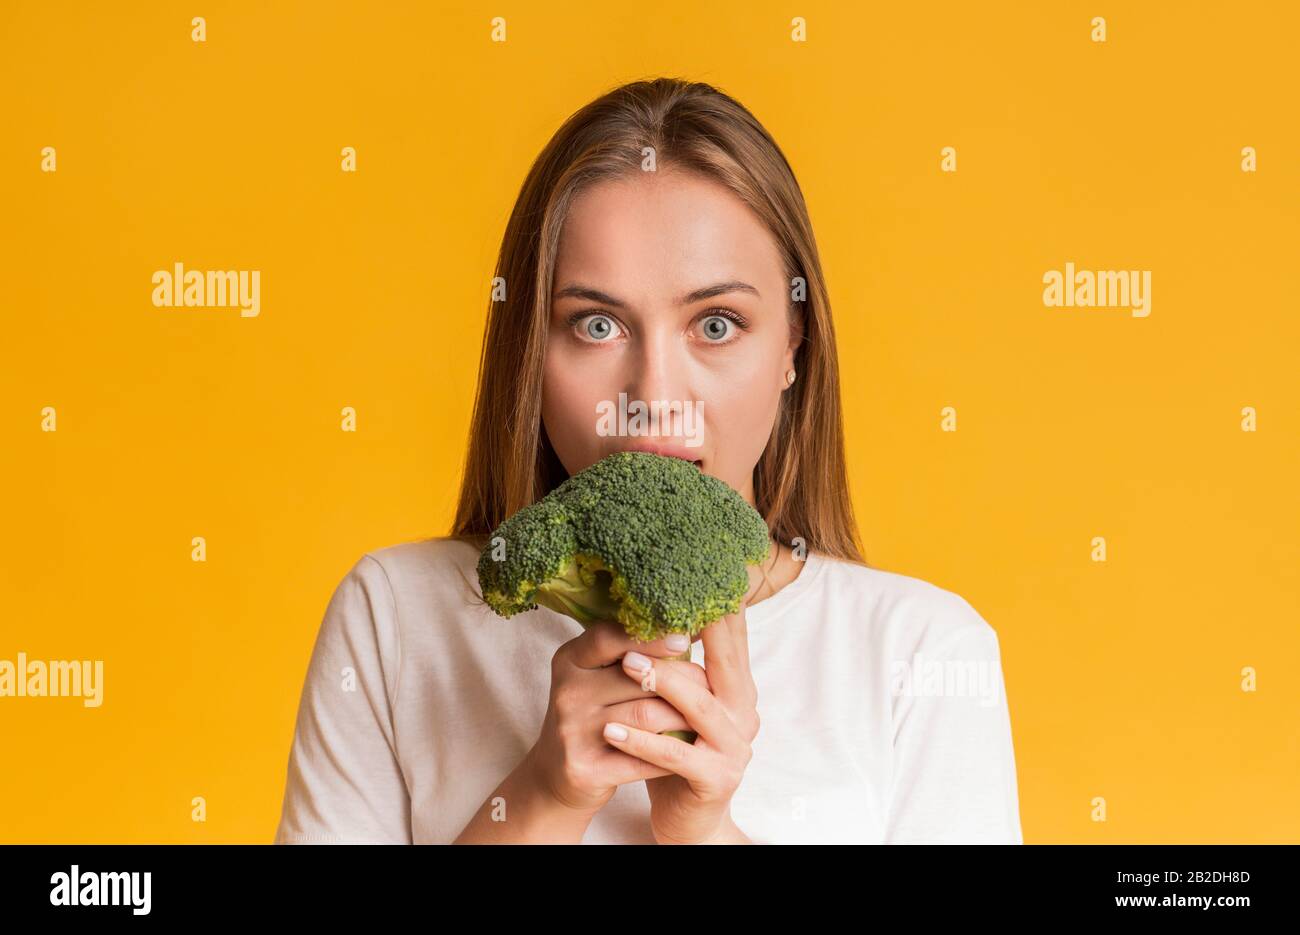 Young Woman Eating Broccoli, Biting Healthy Vegetable With Wide-Opened Eyes Stock Photo